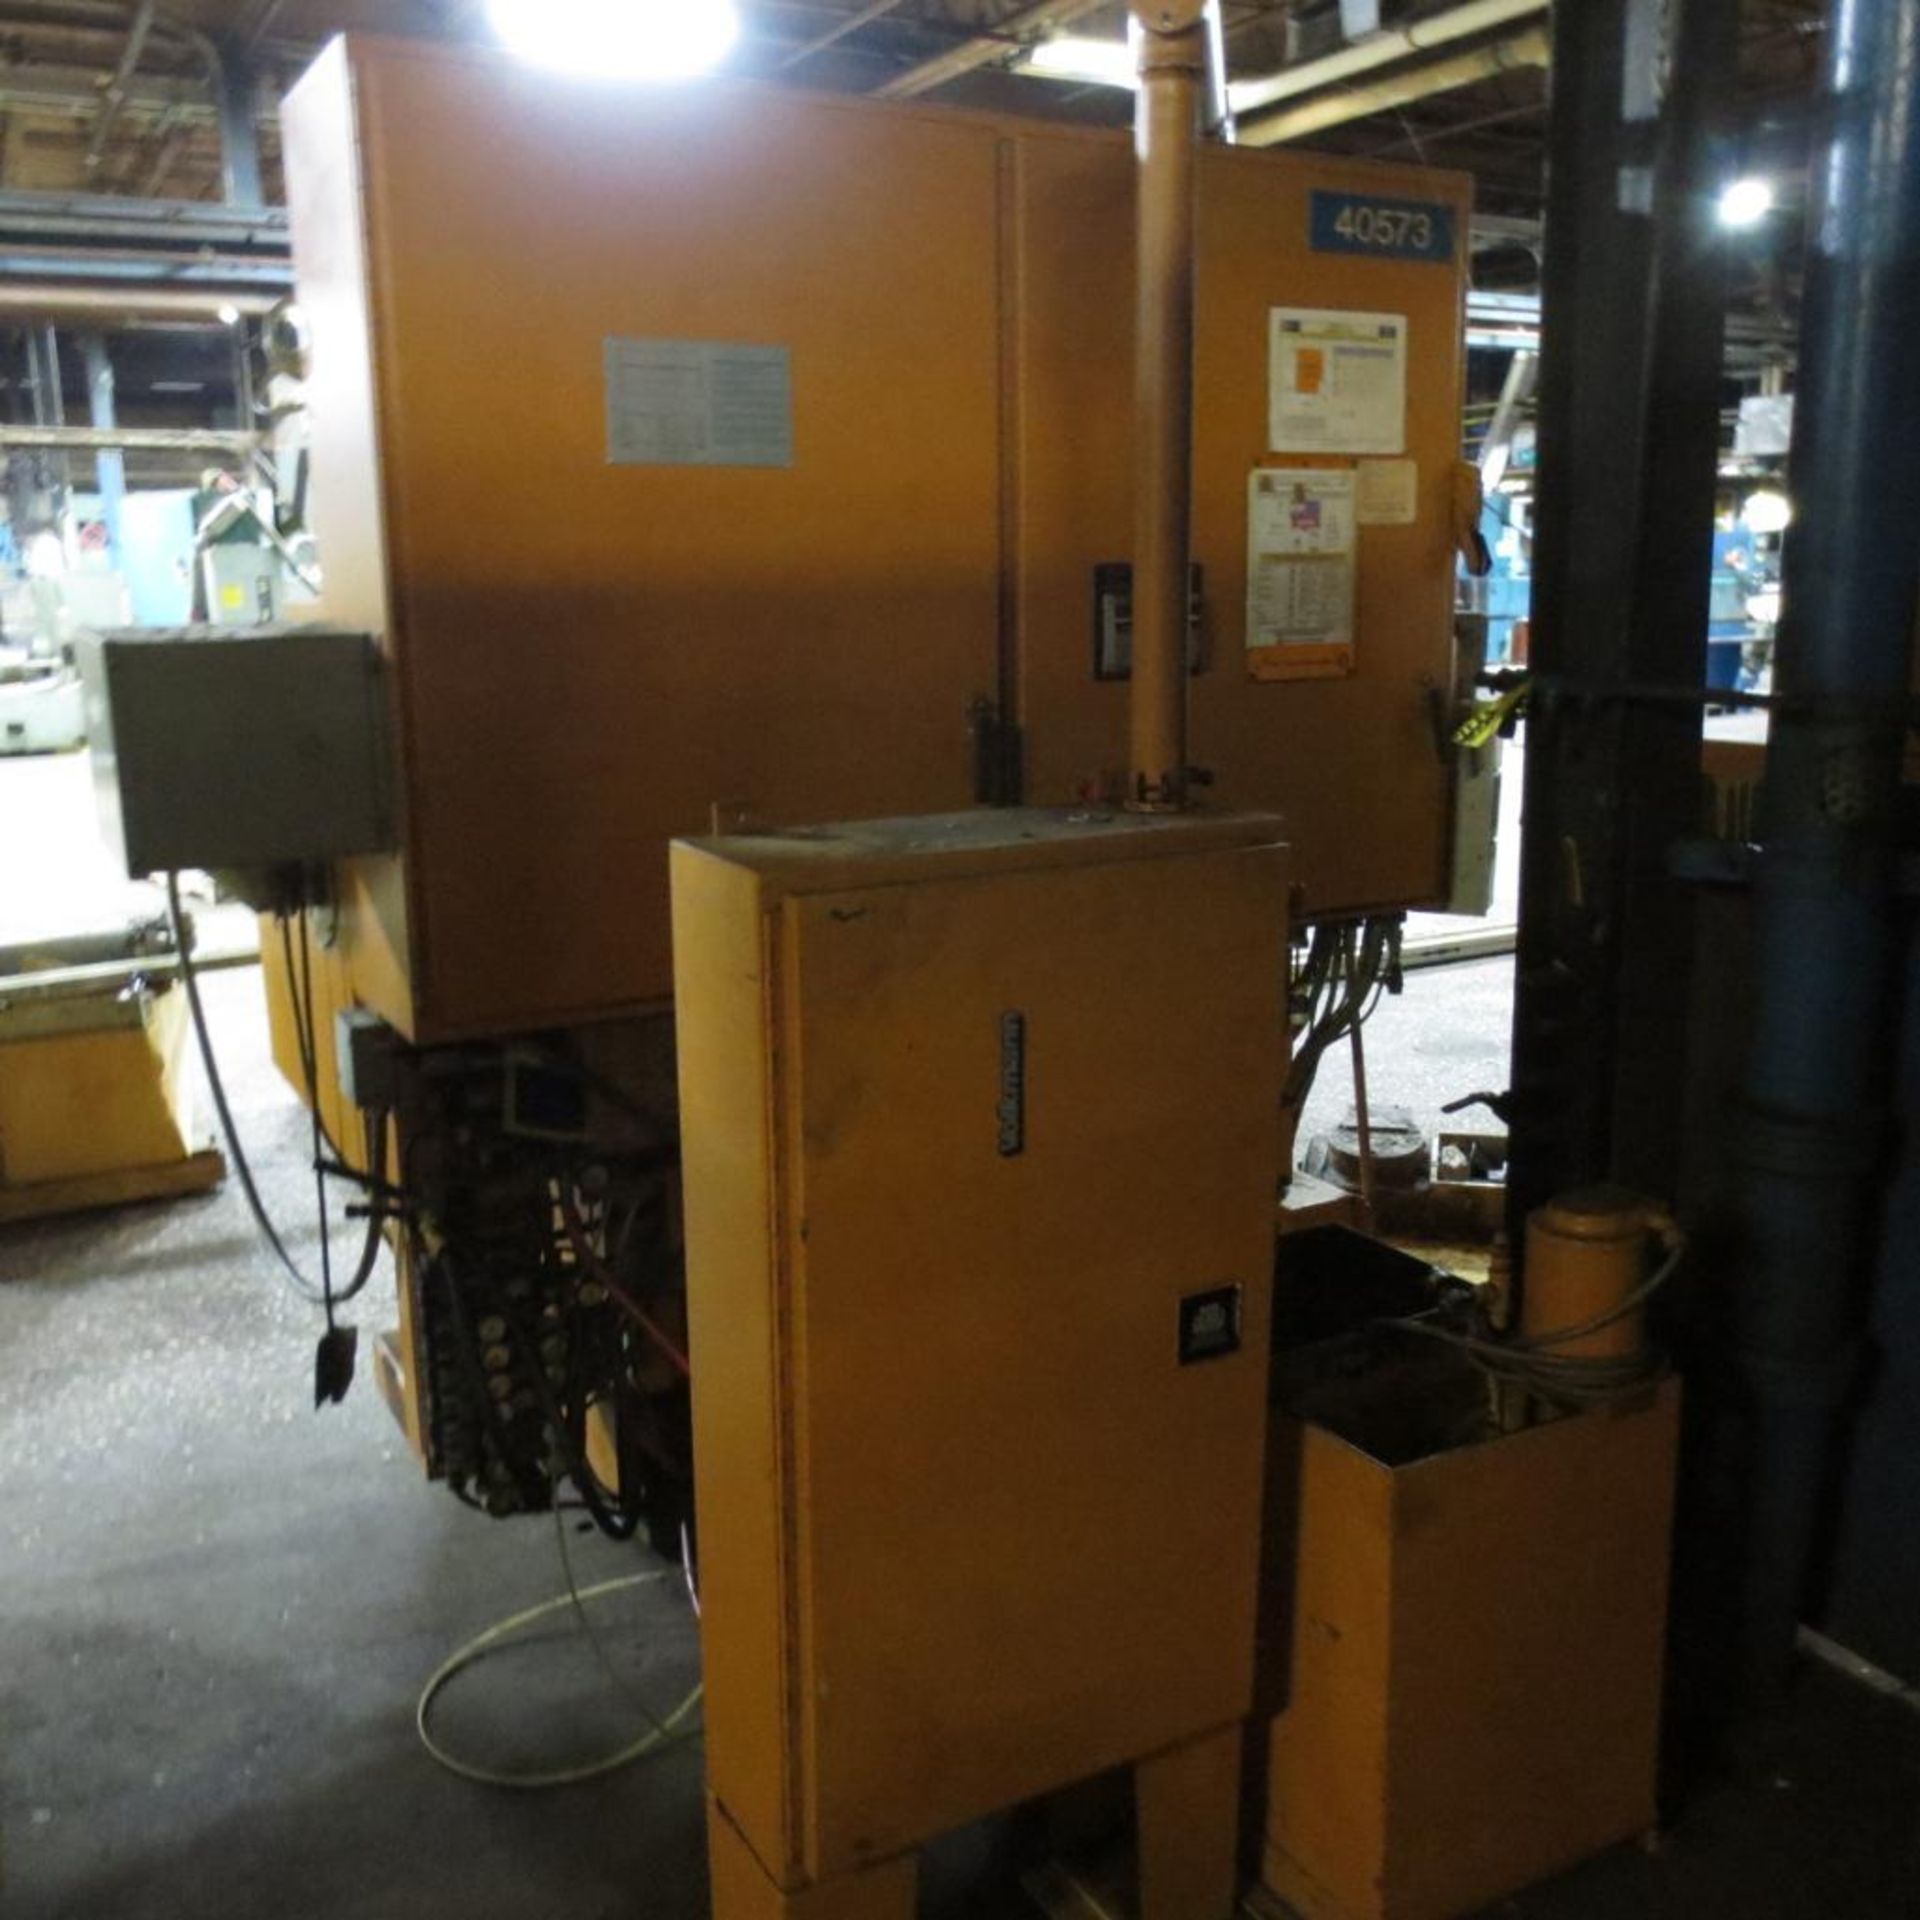 Bryant EX-Cell-0 LL1-10 CNC Grinder, S/N W-16893. Loading Fee is $350.00 - Image 7 of 8